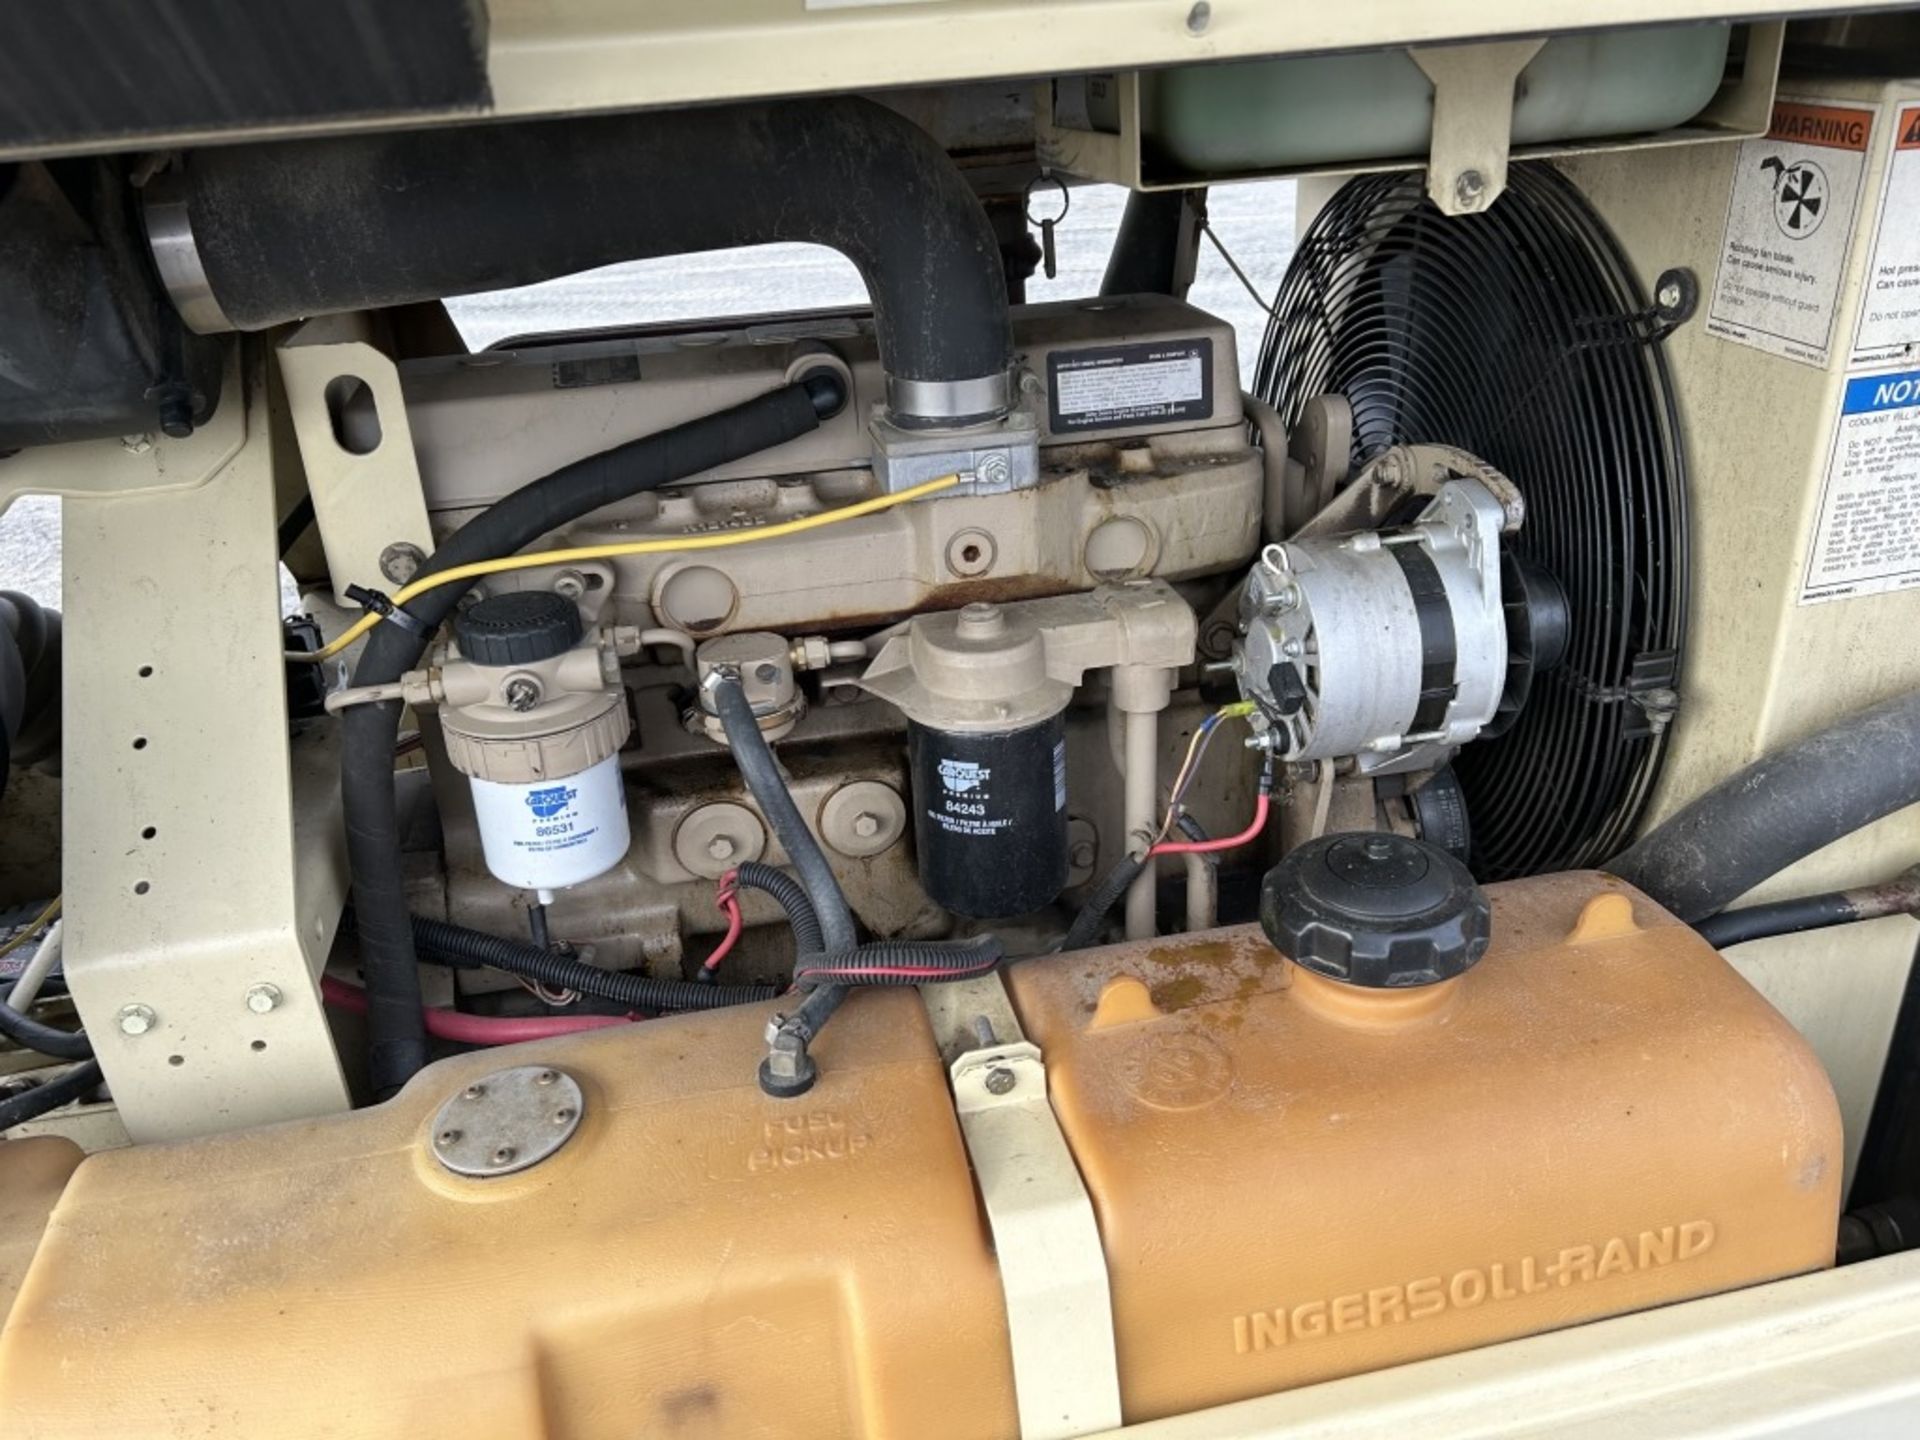 2001 Ingersoll-Rand 185 Towable Air Compressor - Image 15 of 21